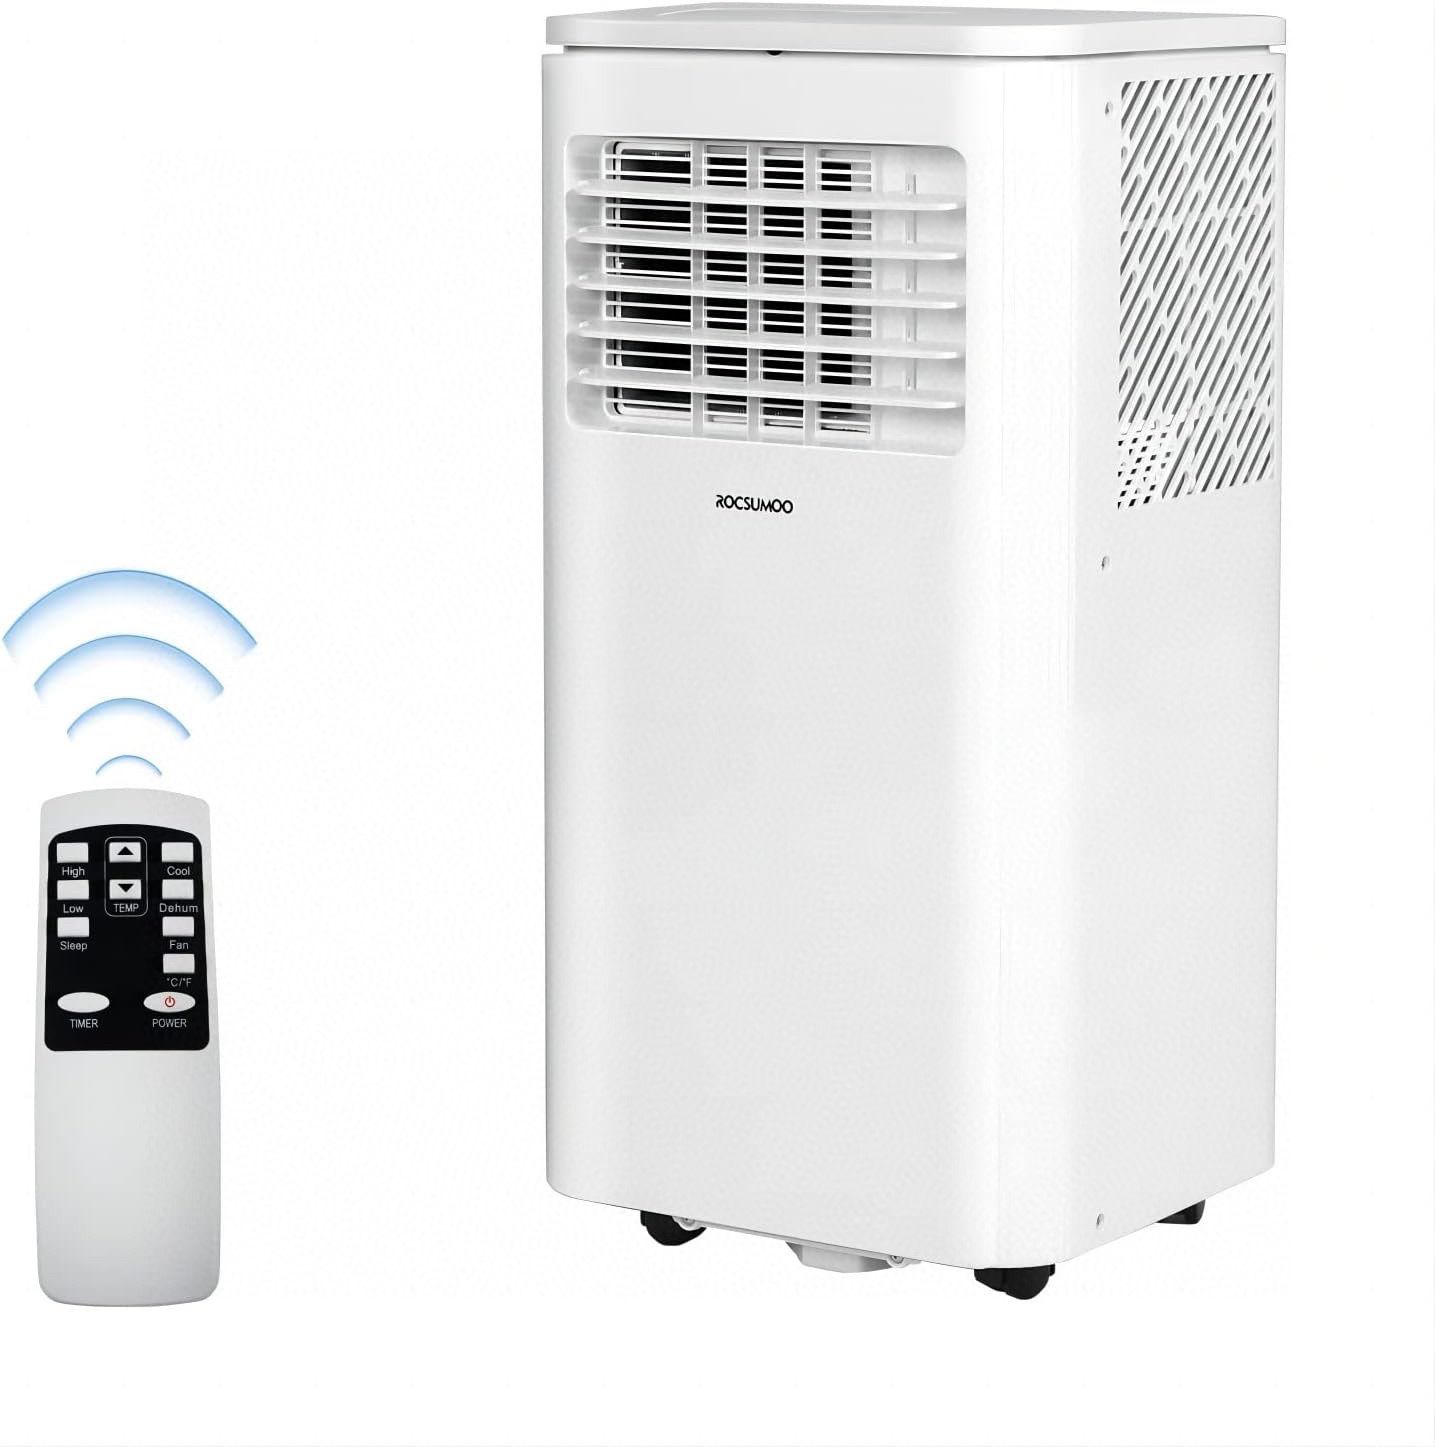 8,000 BTU Portable Air Conditioners,ROCSUMOO 3-in-1 Portable AC Unit with Fan & Dehumidifier Cools, Energy Saving Portable AC with ECO Mode, 24H Timer